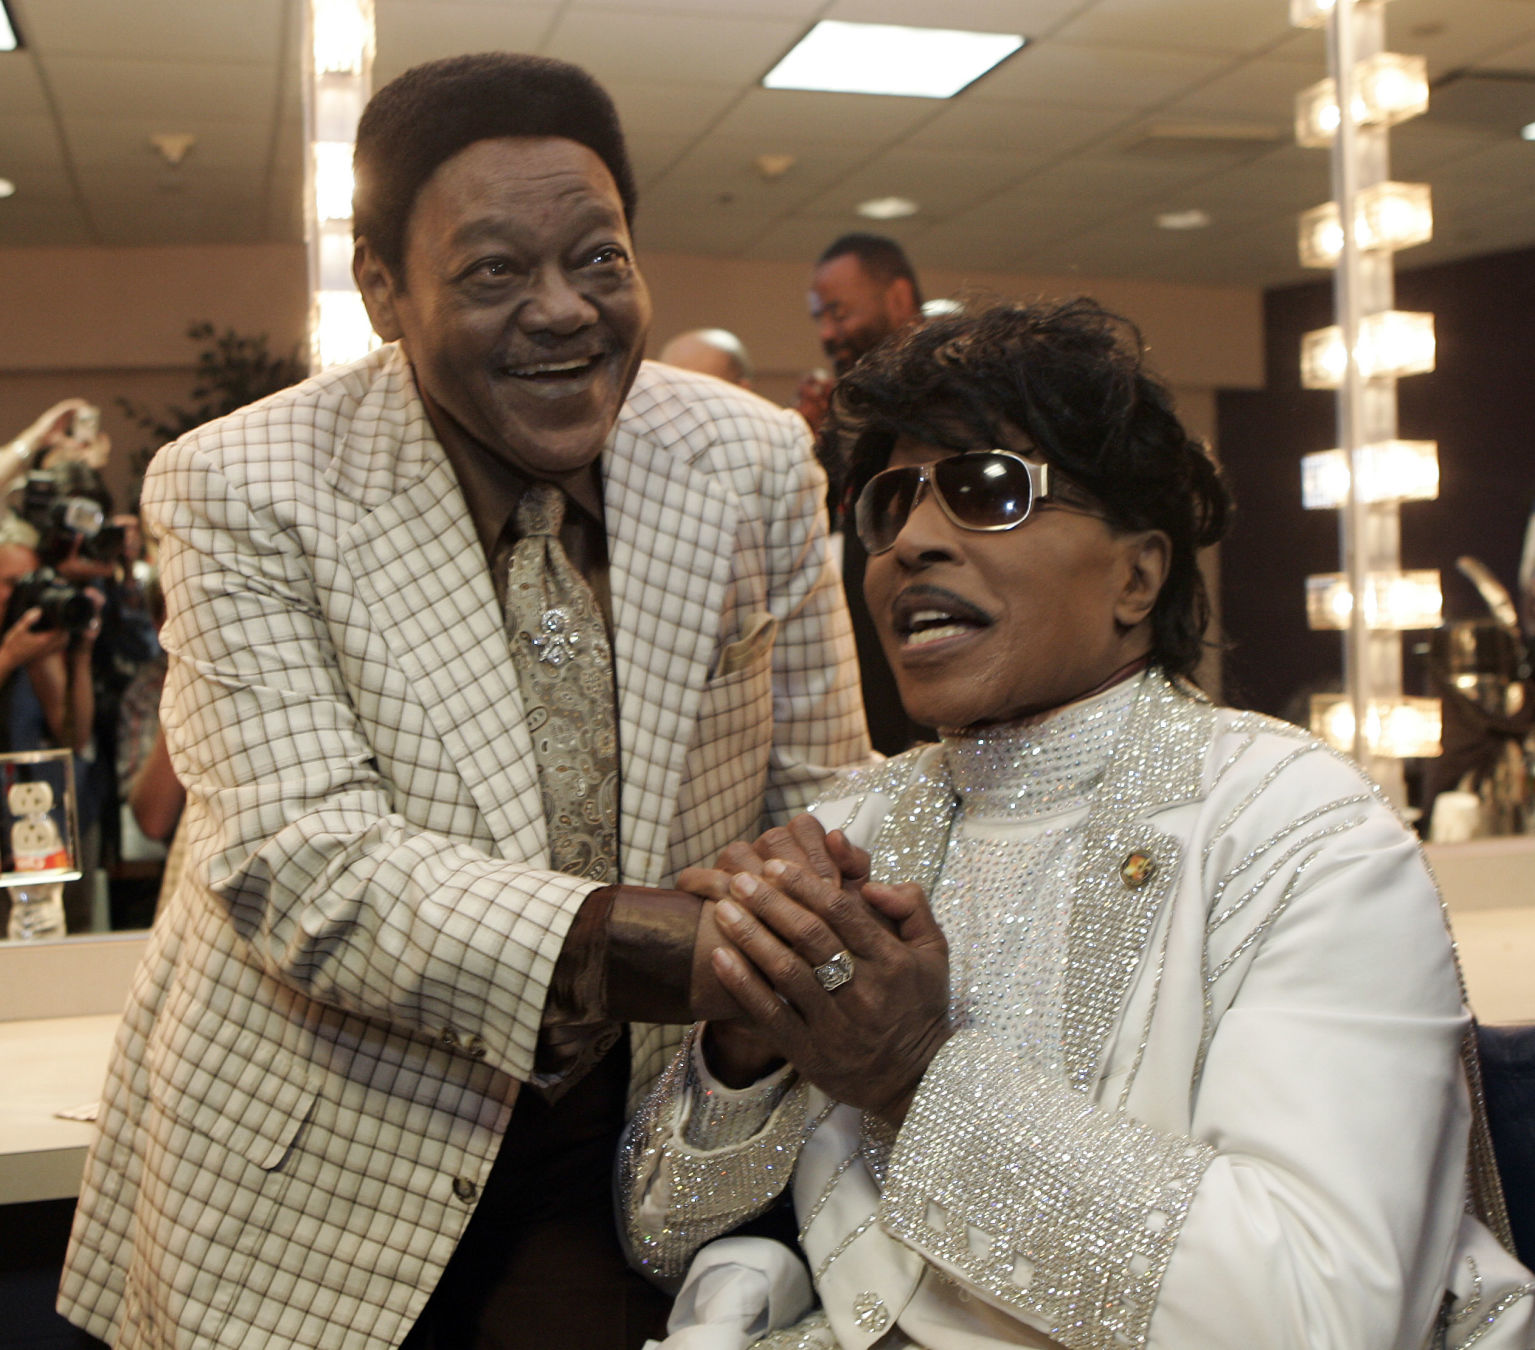 The late great Little Richard was always full of surprises, from